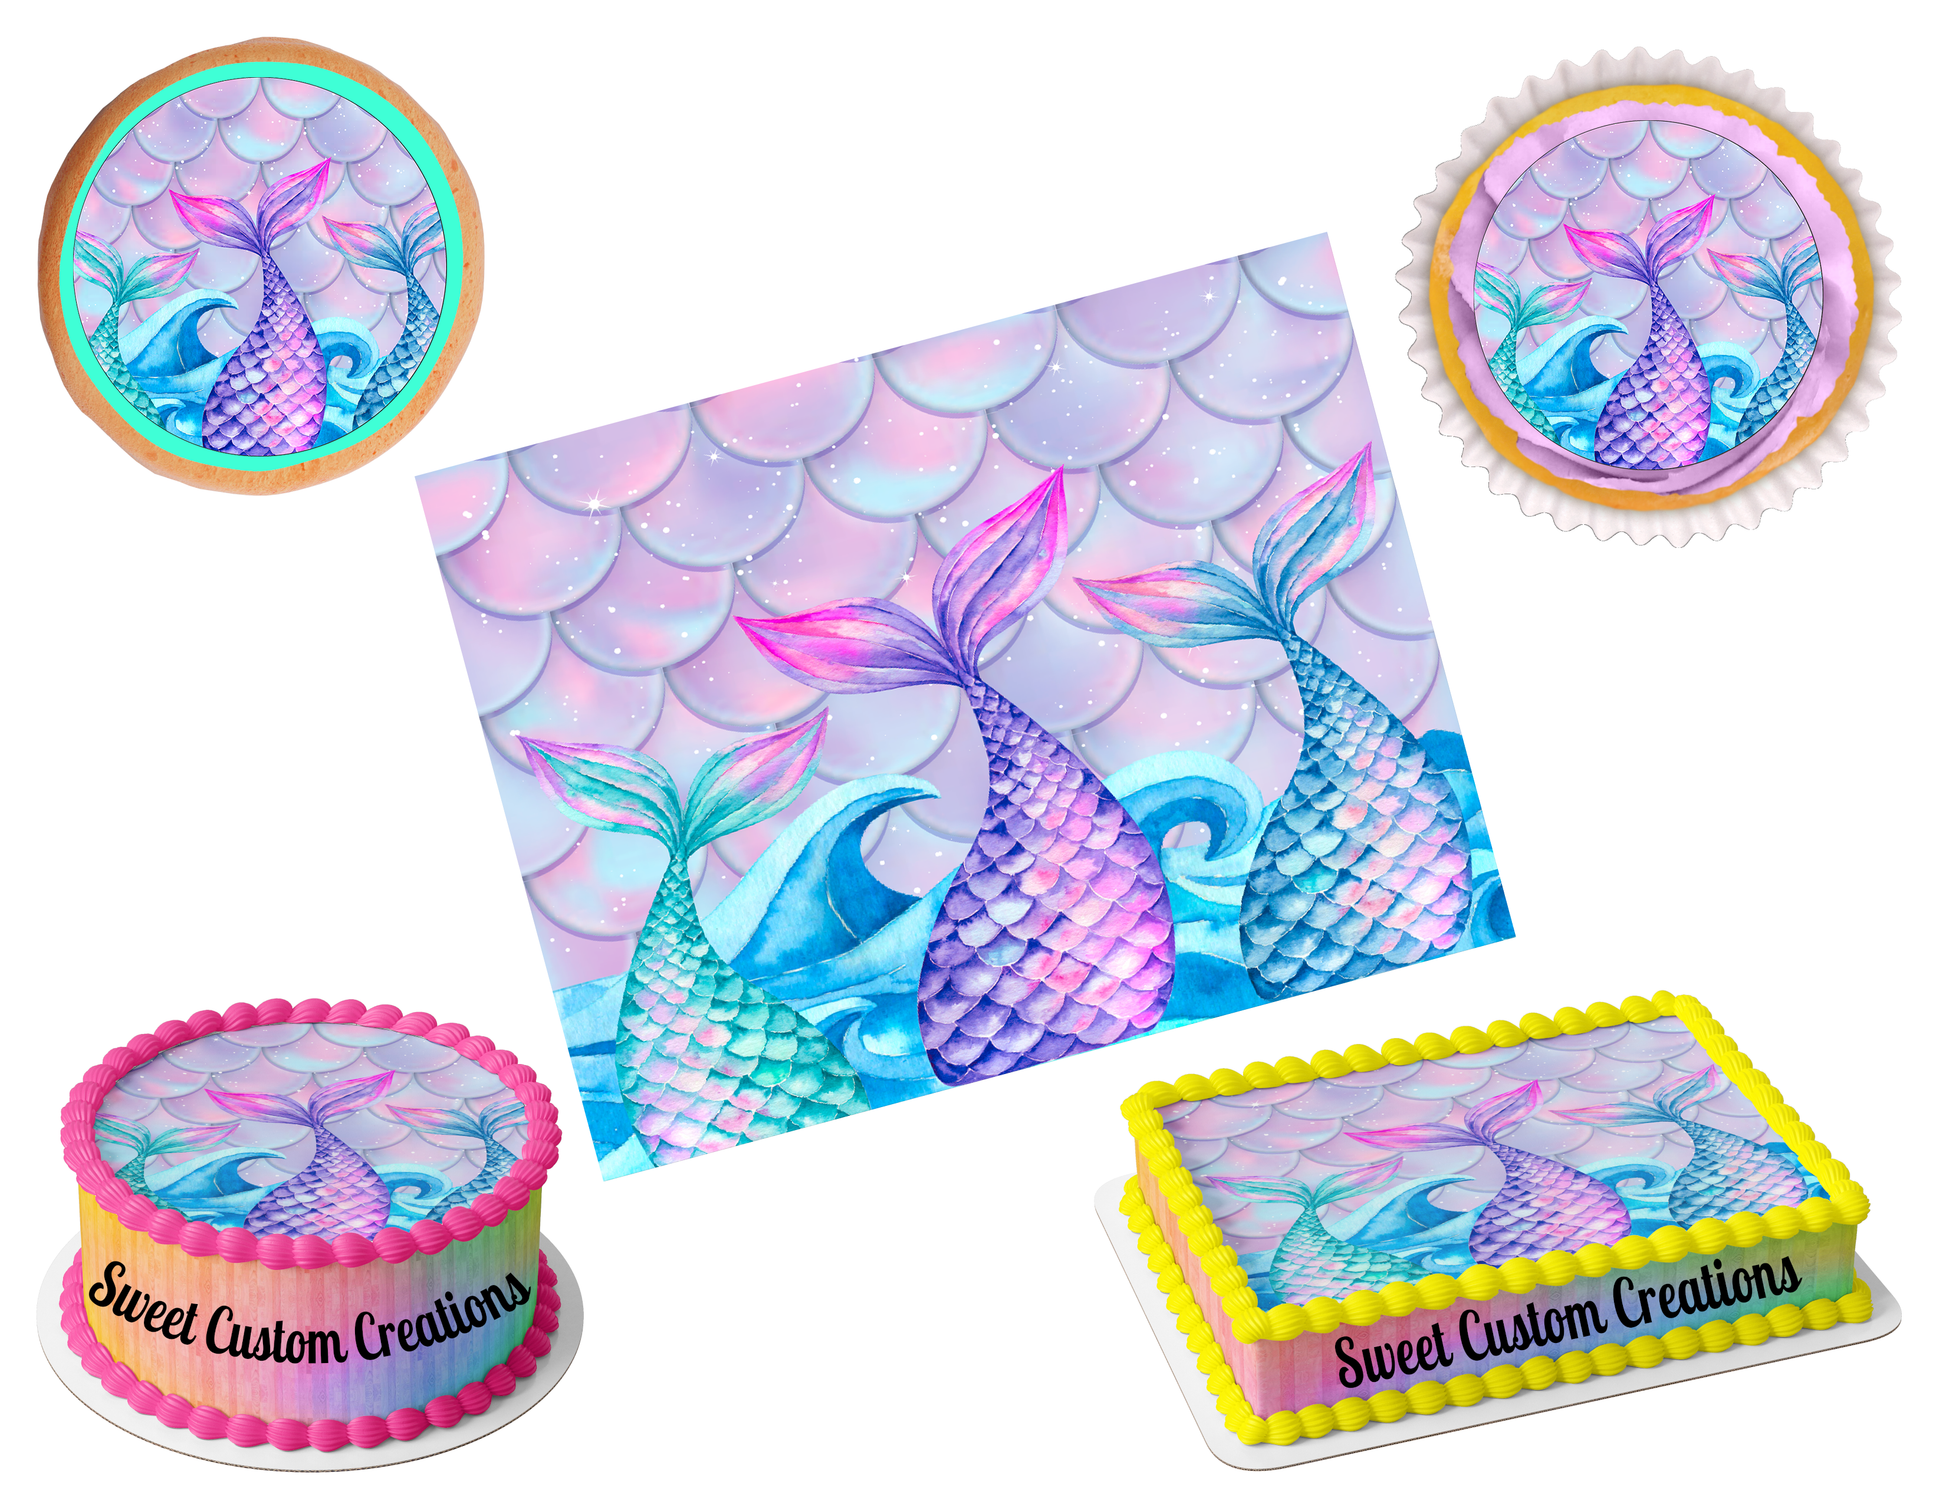 Mermaid Tails Edible Image Frosting Sheet #1 (70+ sizes)